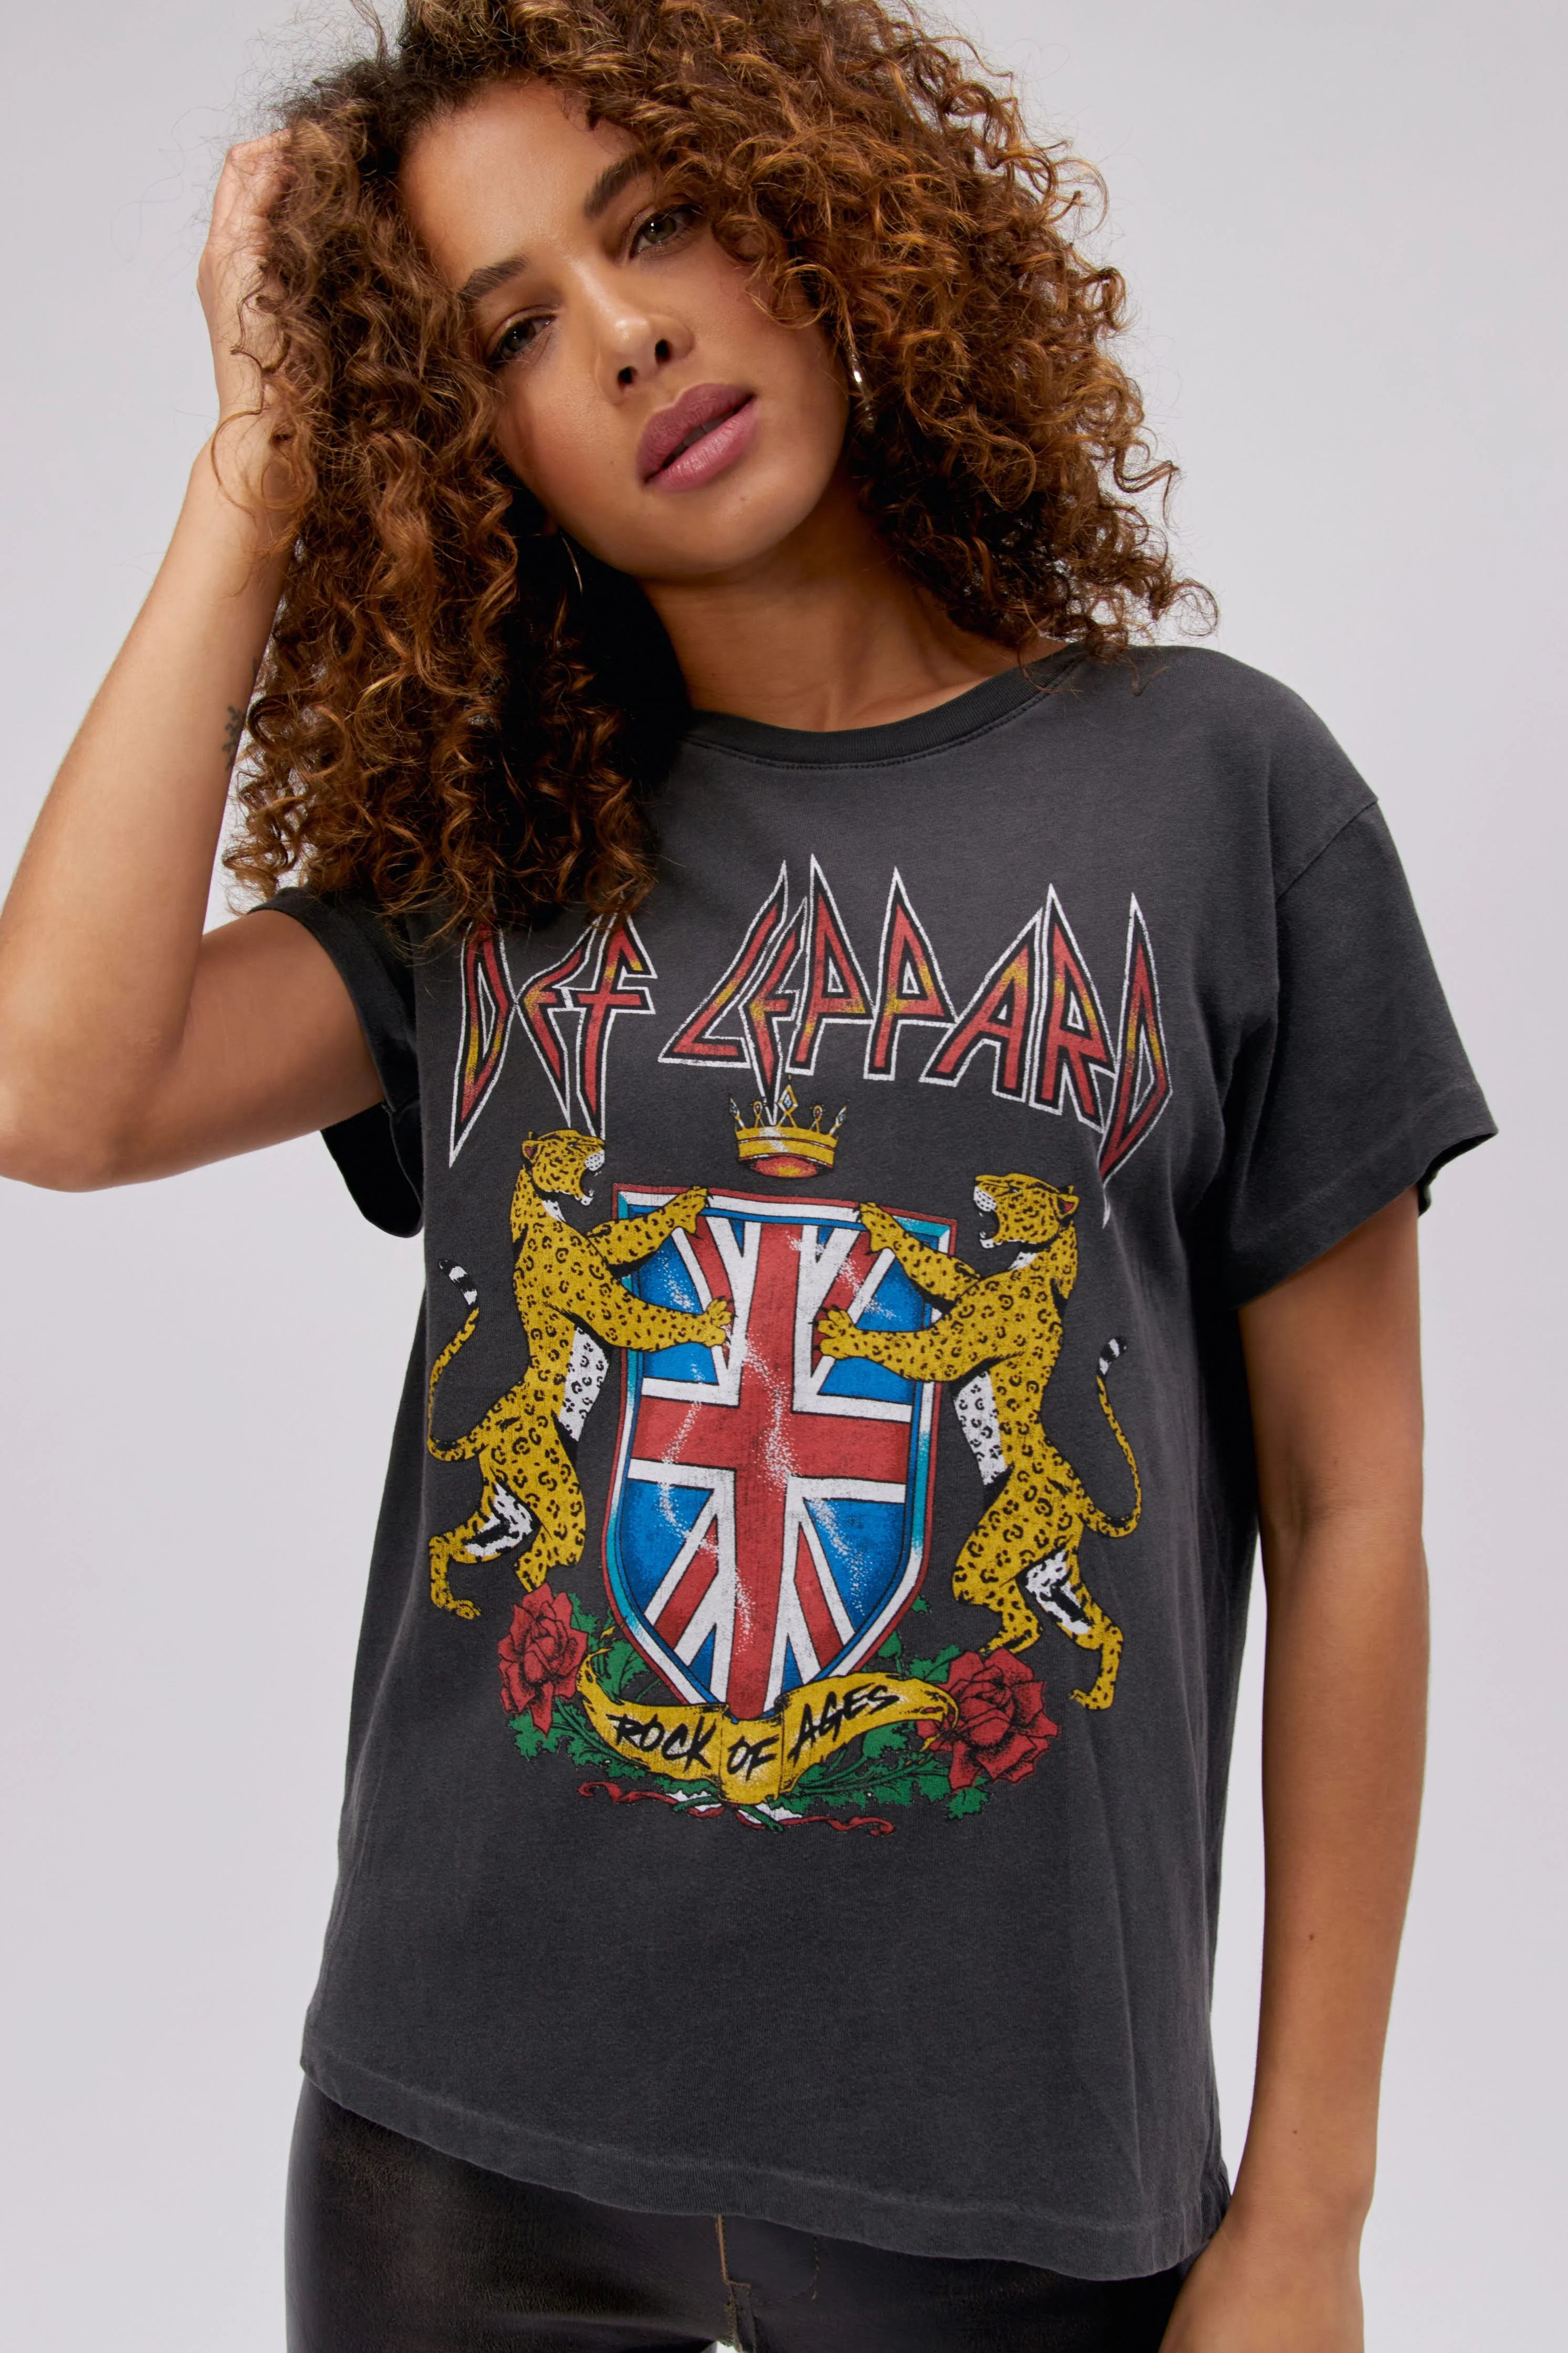 Def Leppard Rock of Ages Tour Tee | Daydreamer